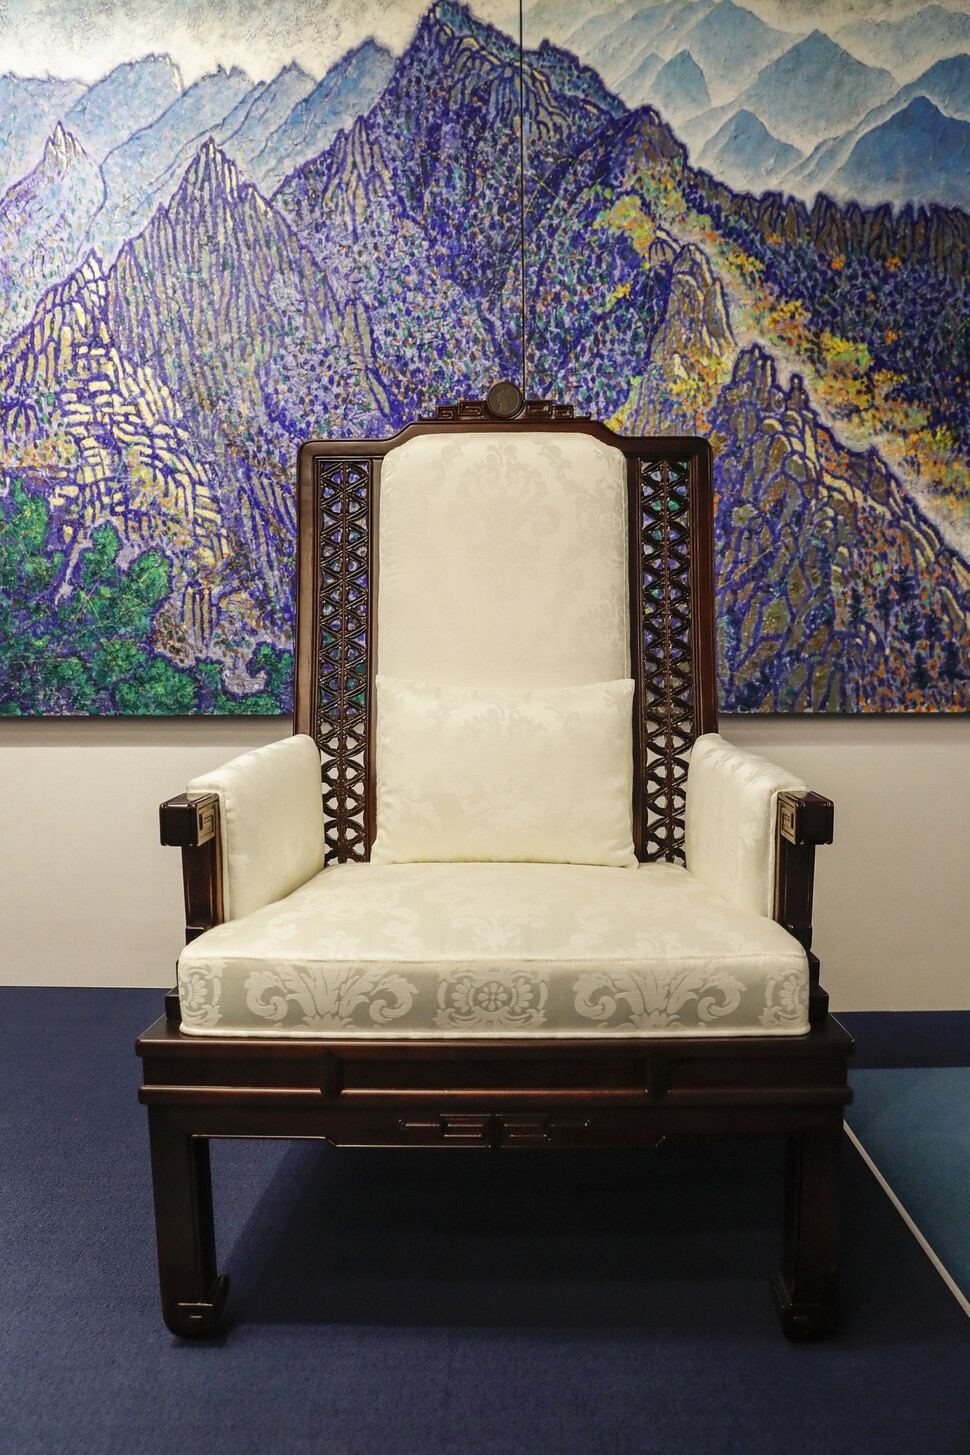 Traditional style Korean chairs have been made especially for the inter-Korean summit. The chairs feature a small woodcut design with the shape of the Korean Peninsula. In the background is a picture of Mt. Kumgang in North Korea. (Blue House Photo Pool)